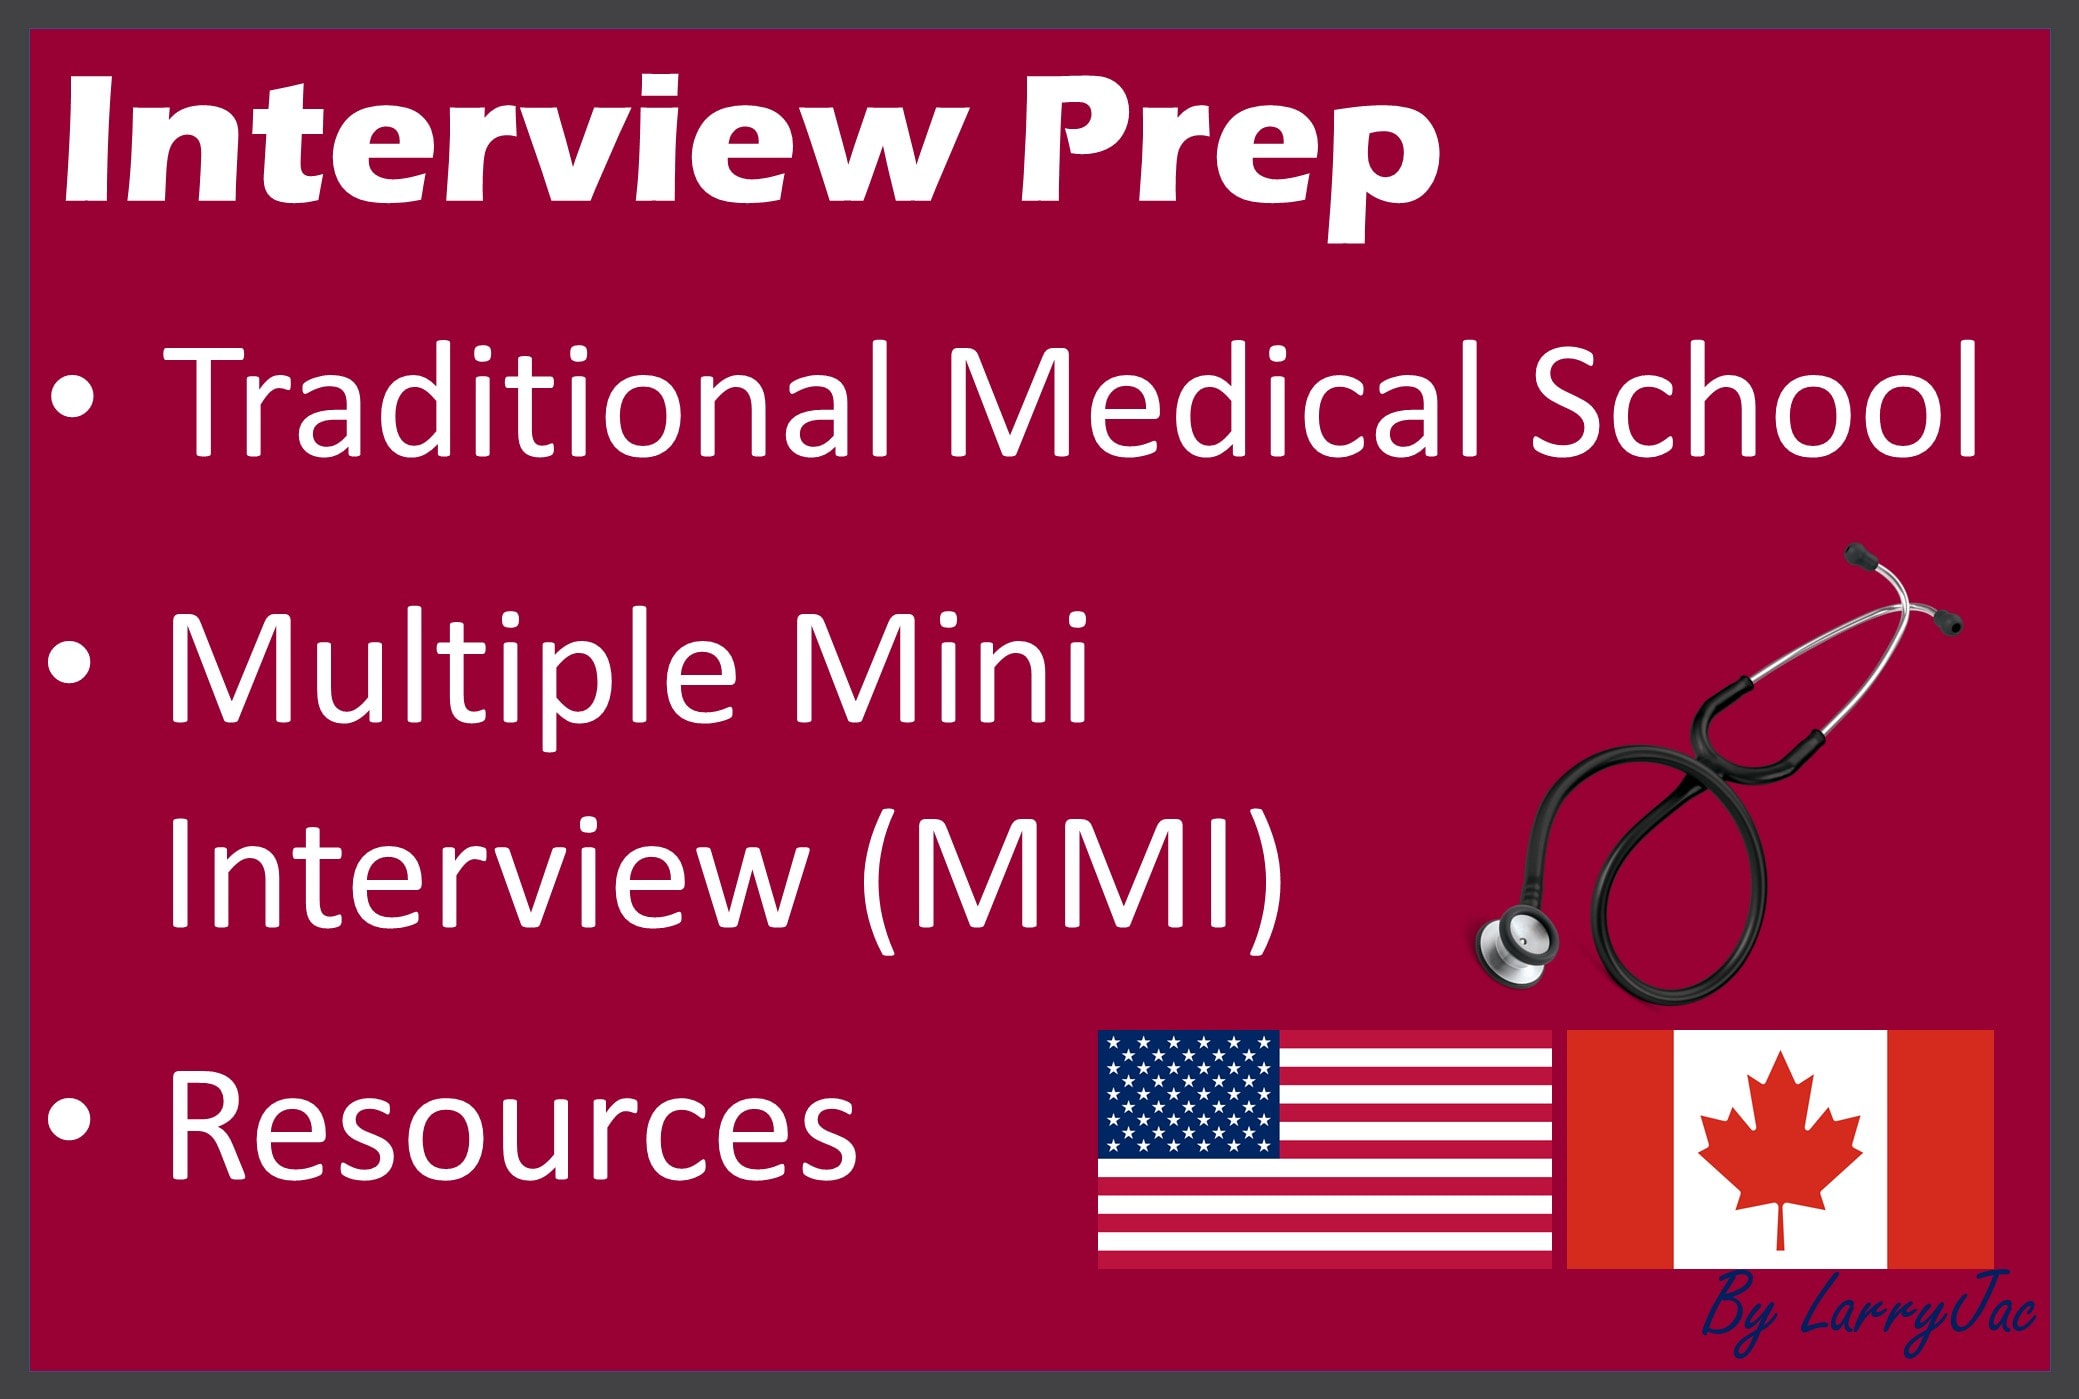 Coach you on medical school interviews by Larryjac | Fiverr